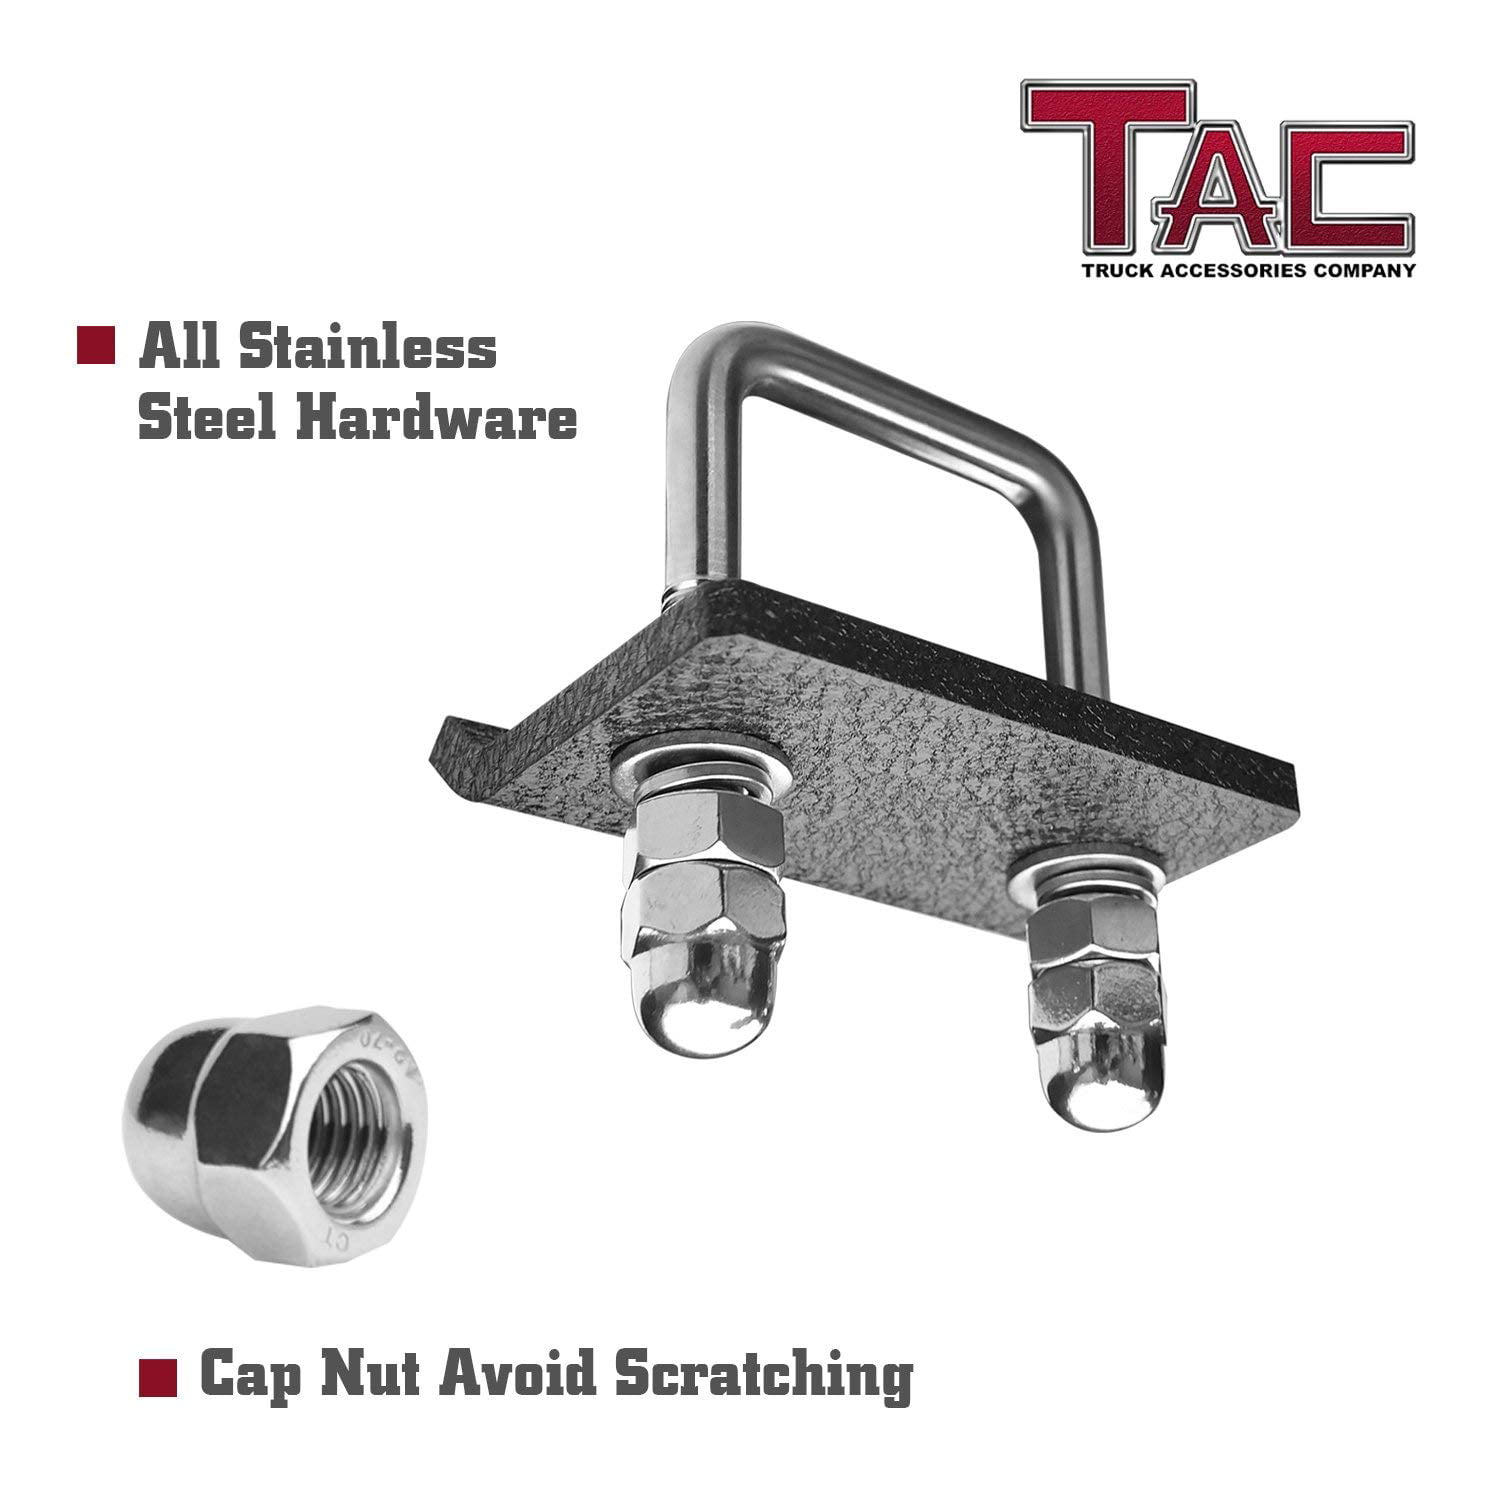 TAC Hitch Tightener Fit 1.25 and 2 Hitches 304 Stainless Steel Anti-Rattle Stabilizer Rust-Free Heavy Duty Lock Down Tow Clamp Suitable for Trailers Carriers & Racks No Wobble 